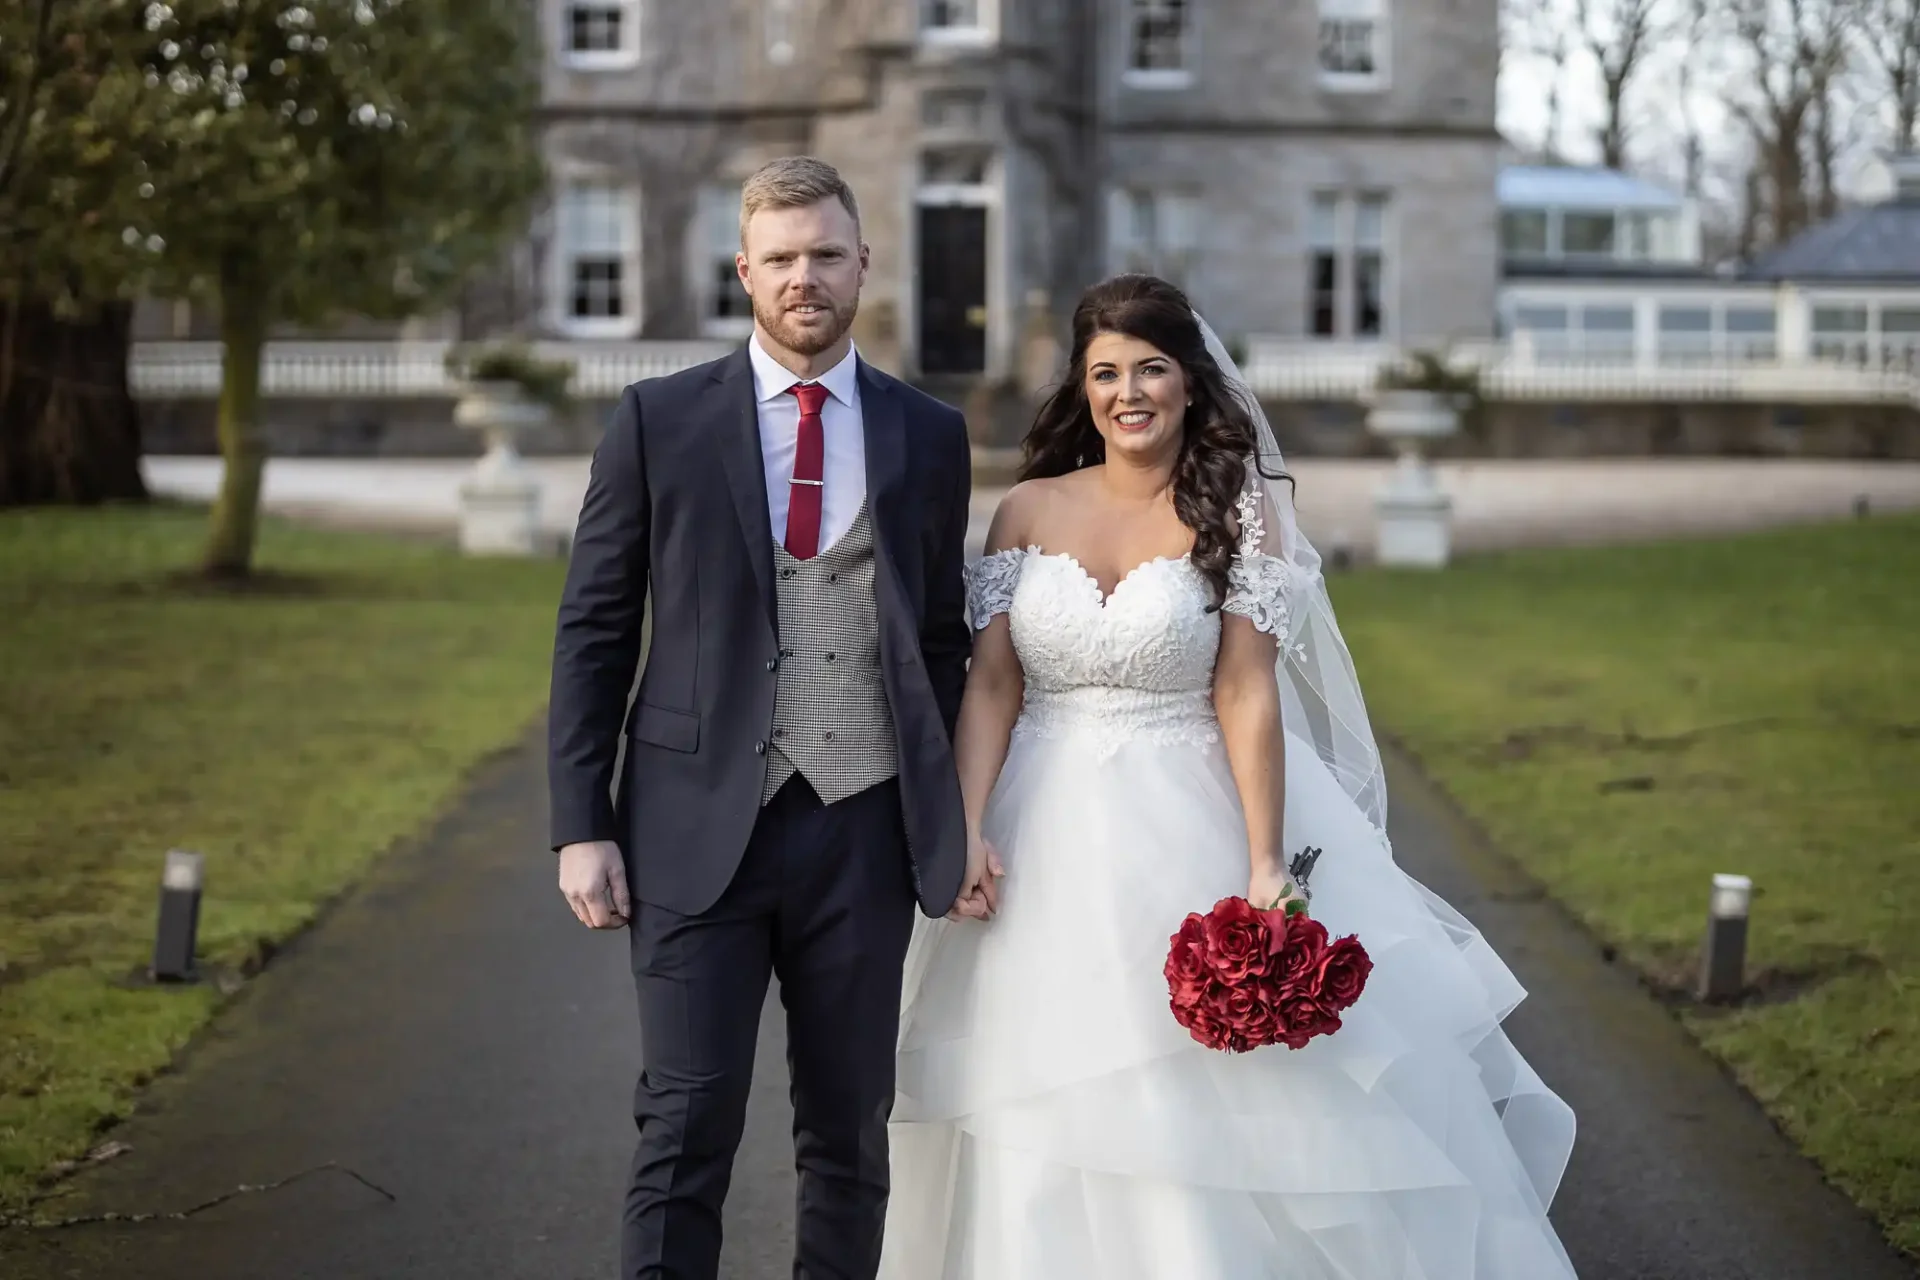 A bride in a white gown and a groom in a gray suit with a red tie walk hand in hand in front of a stone manor house.